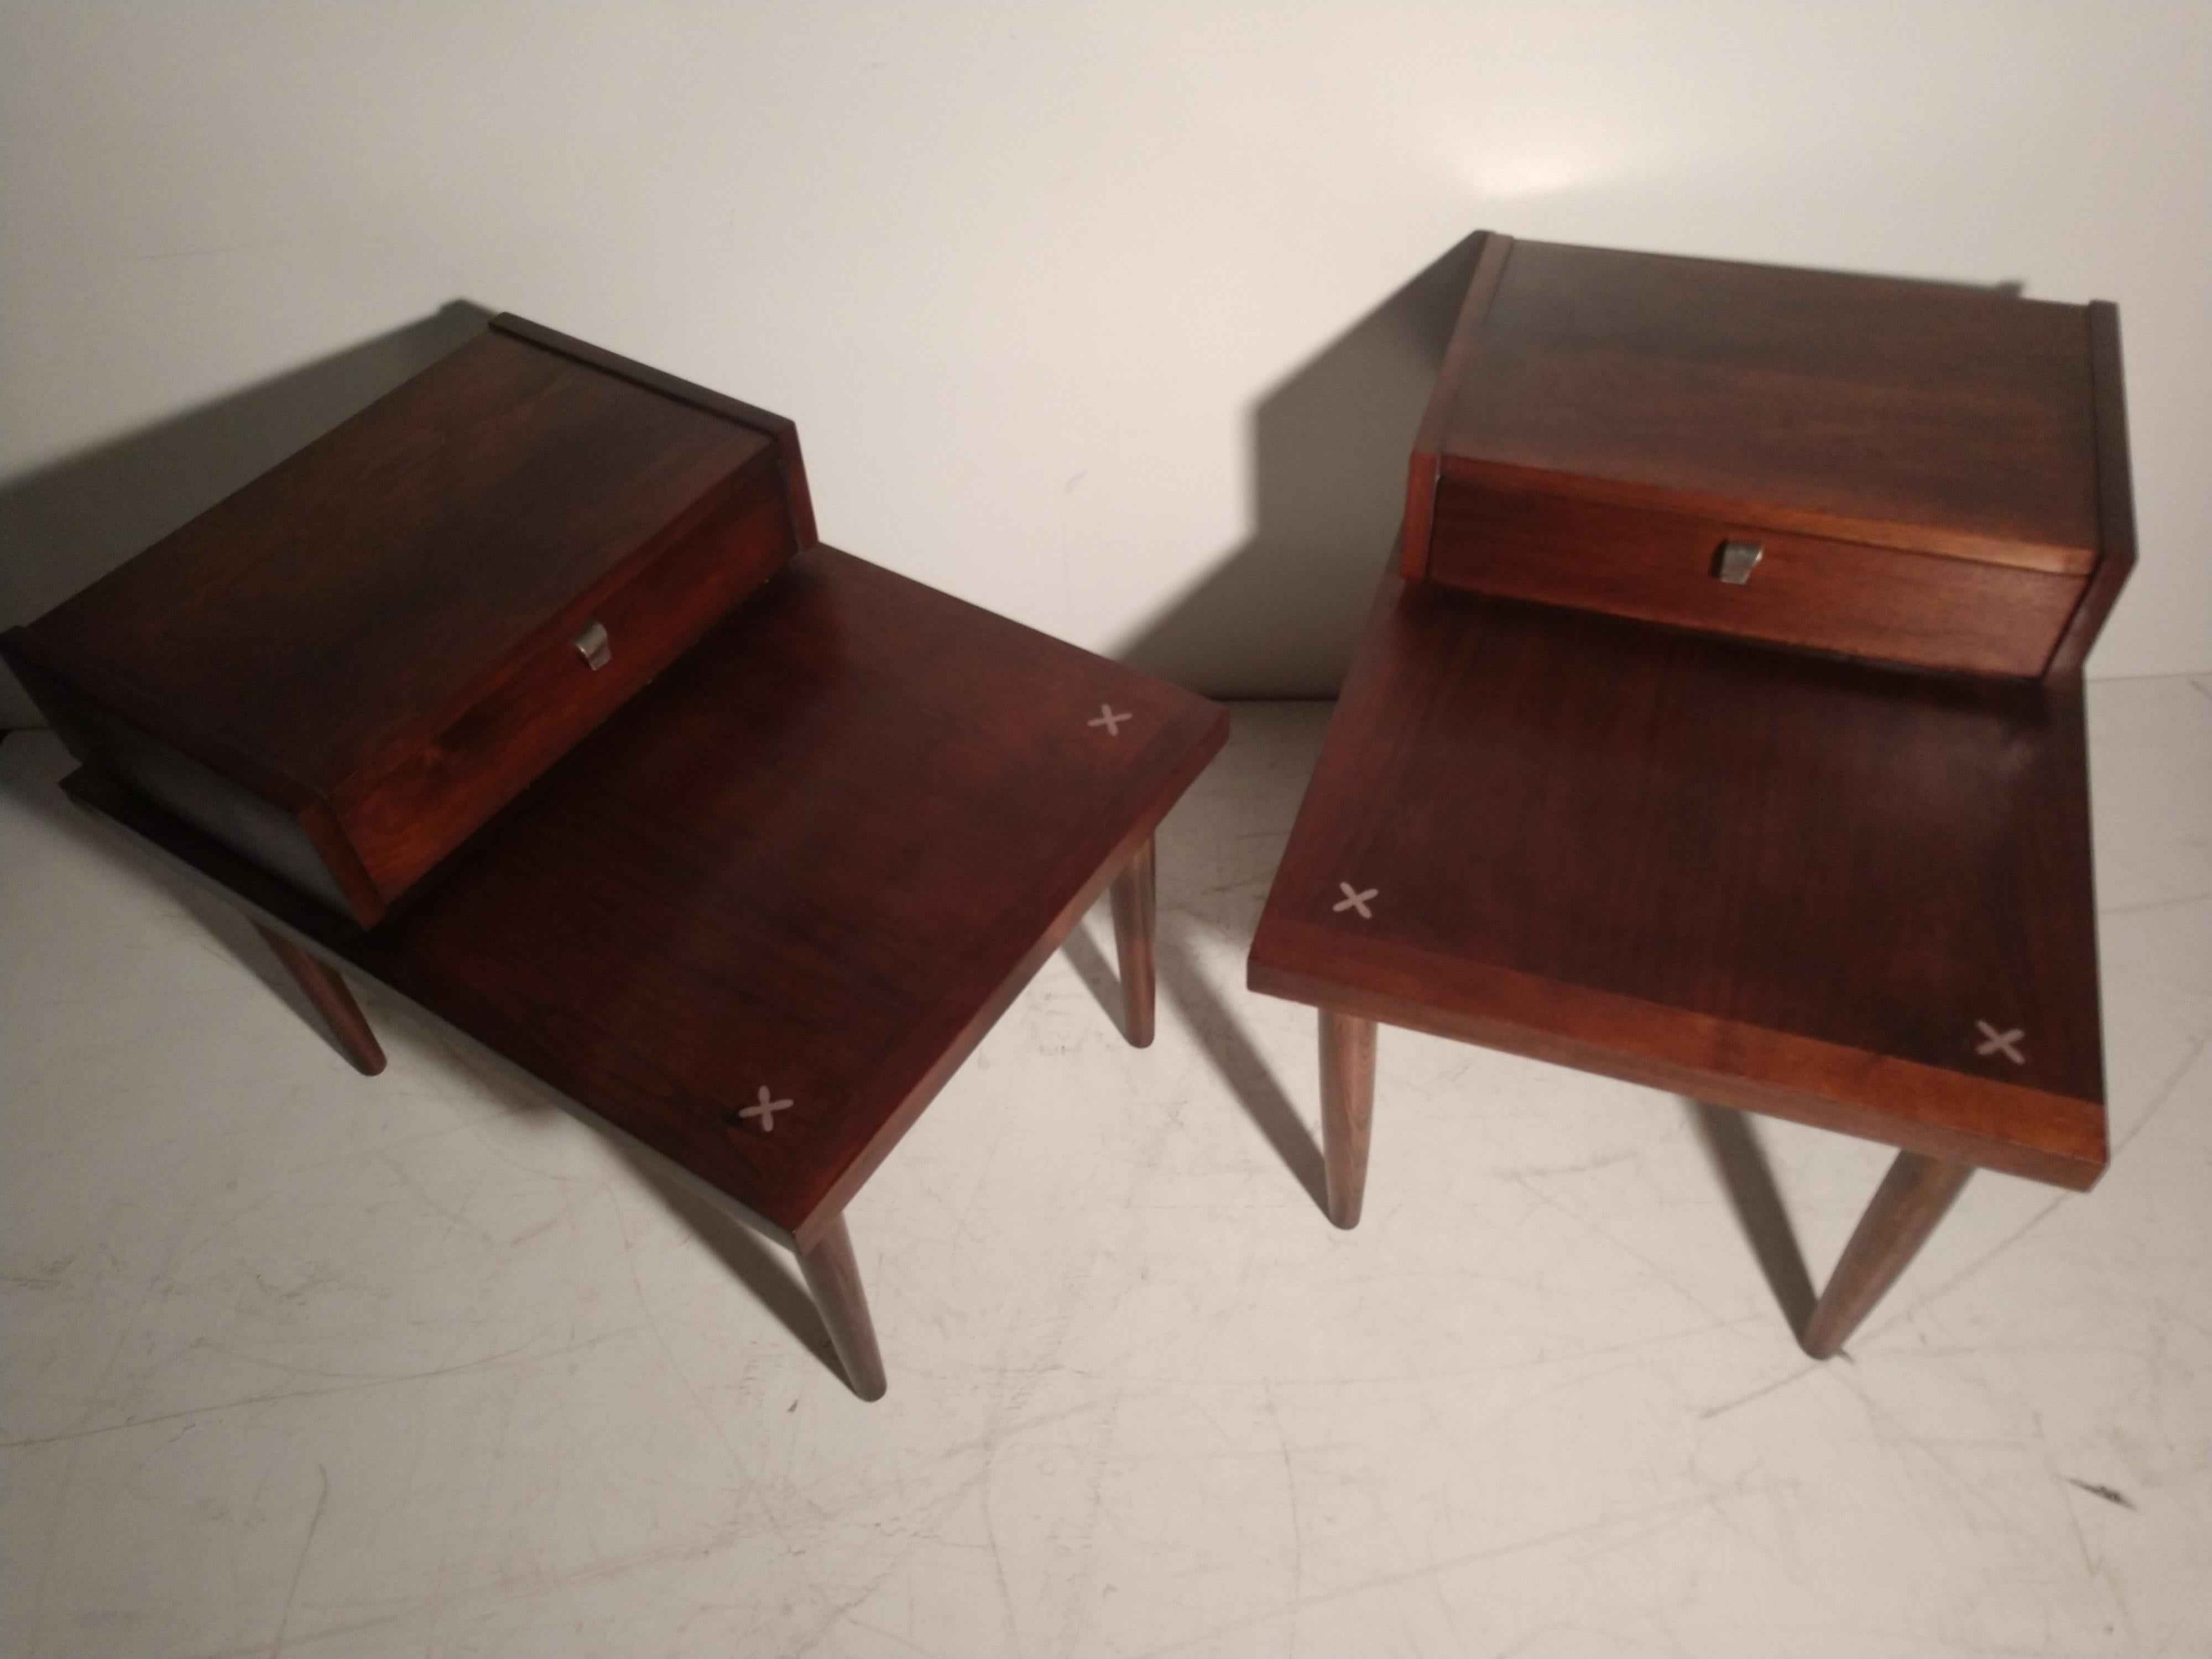 Pair of Mid-Century Modern Mahogany End Tables by Merton Gershun For Sale 3